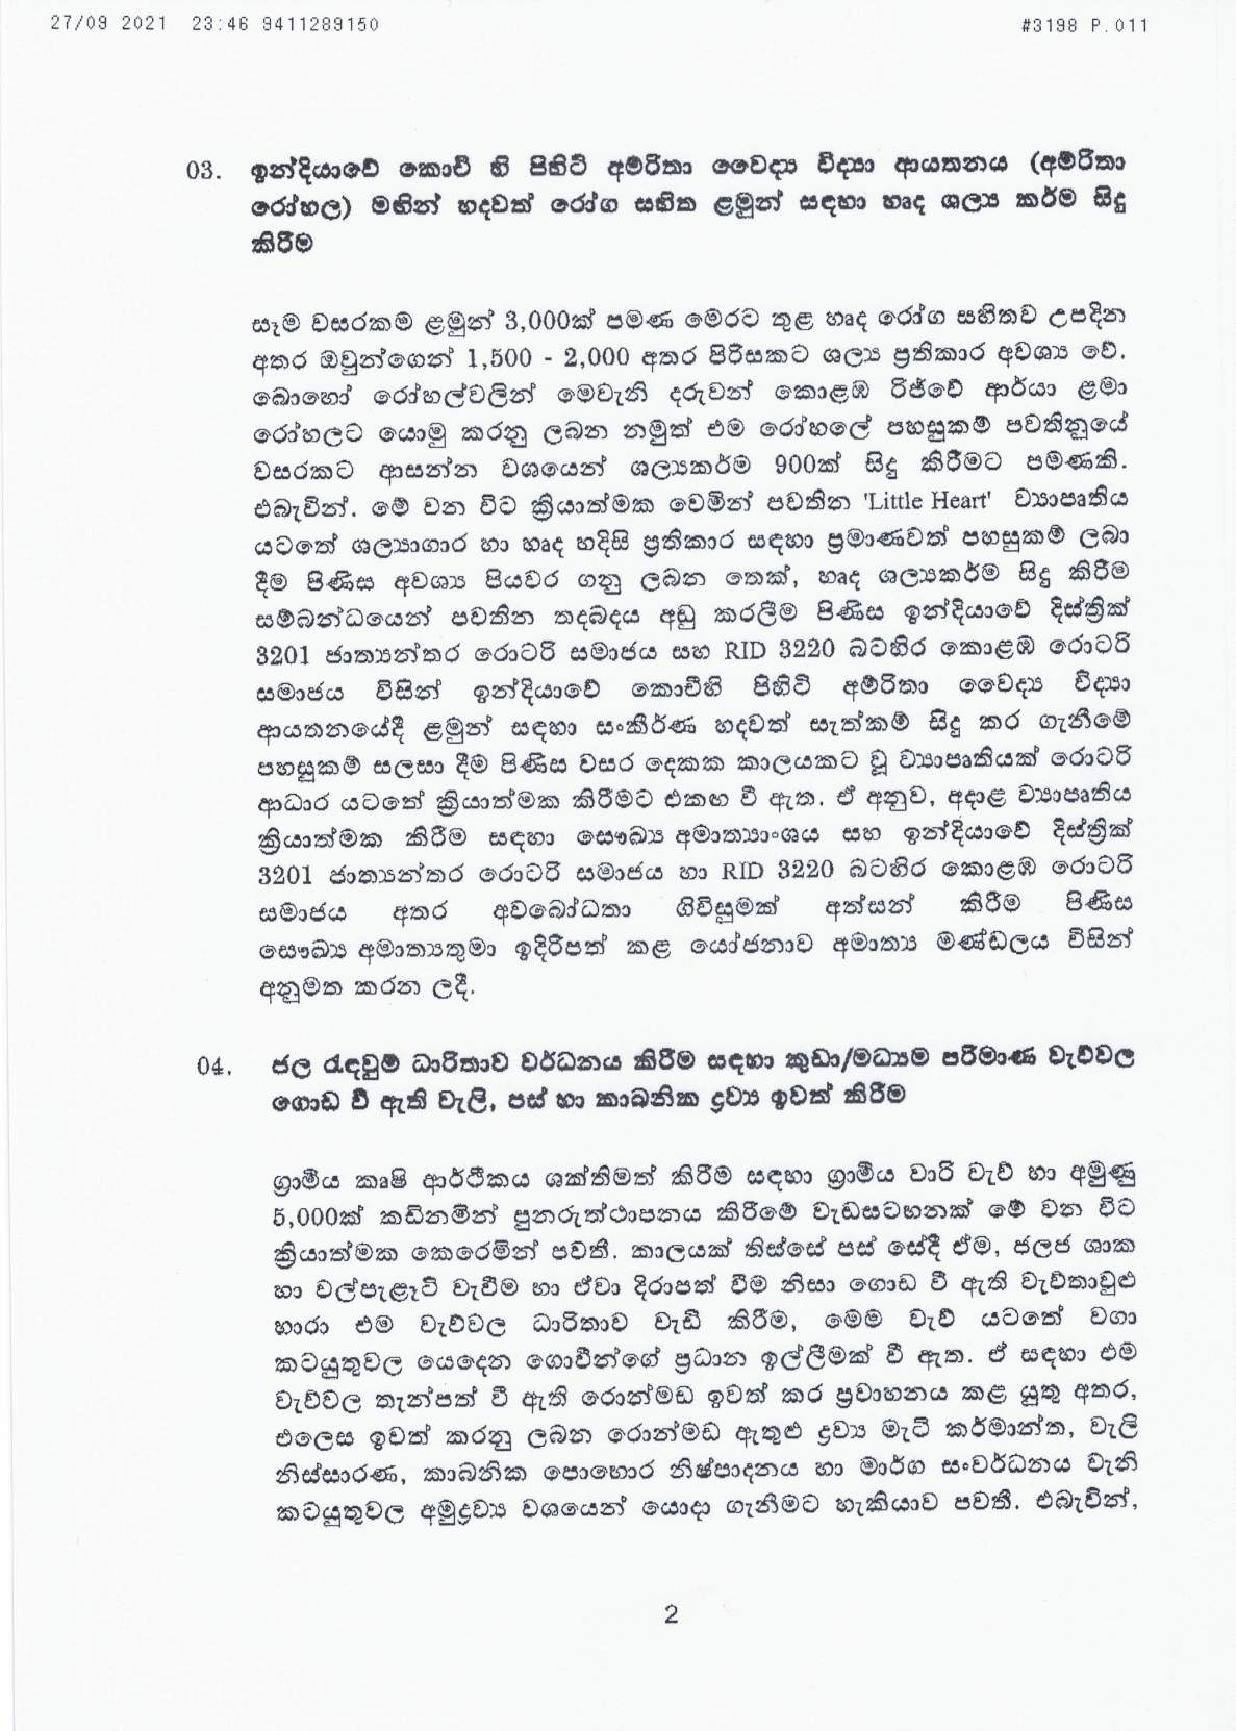 Cabinet Decisions on 27.09.2021 Sinhala page 001